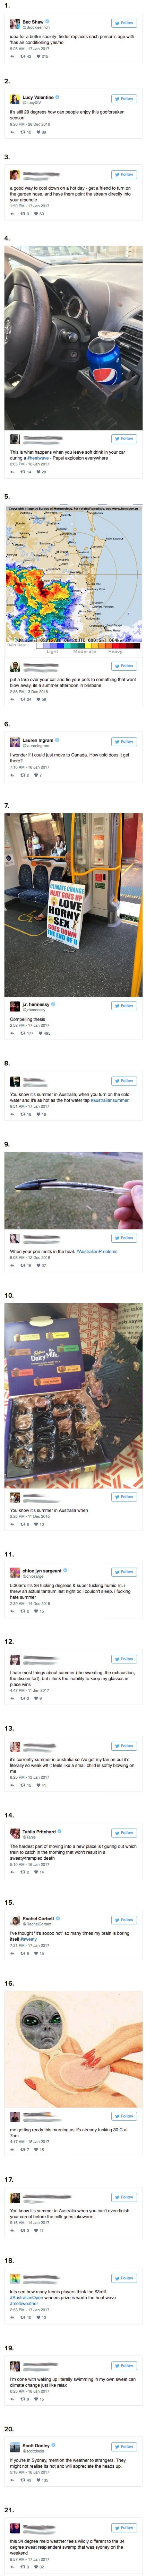 Tweets that prove Australian summer will be the death of us